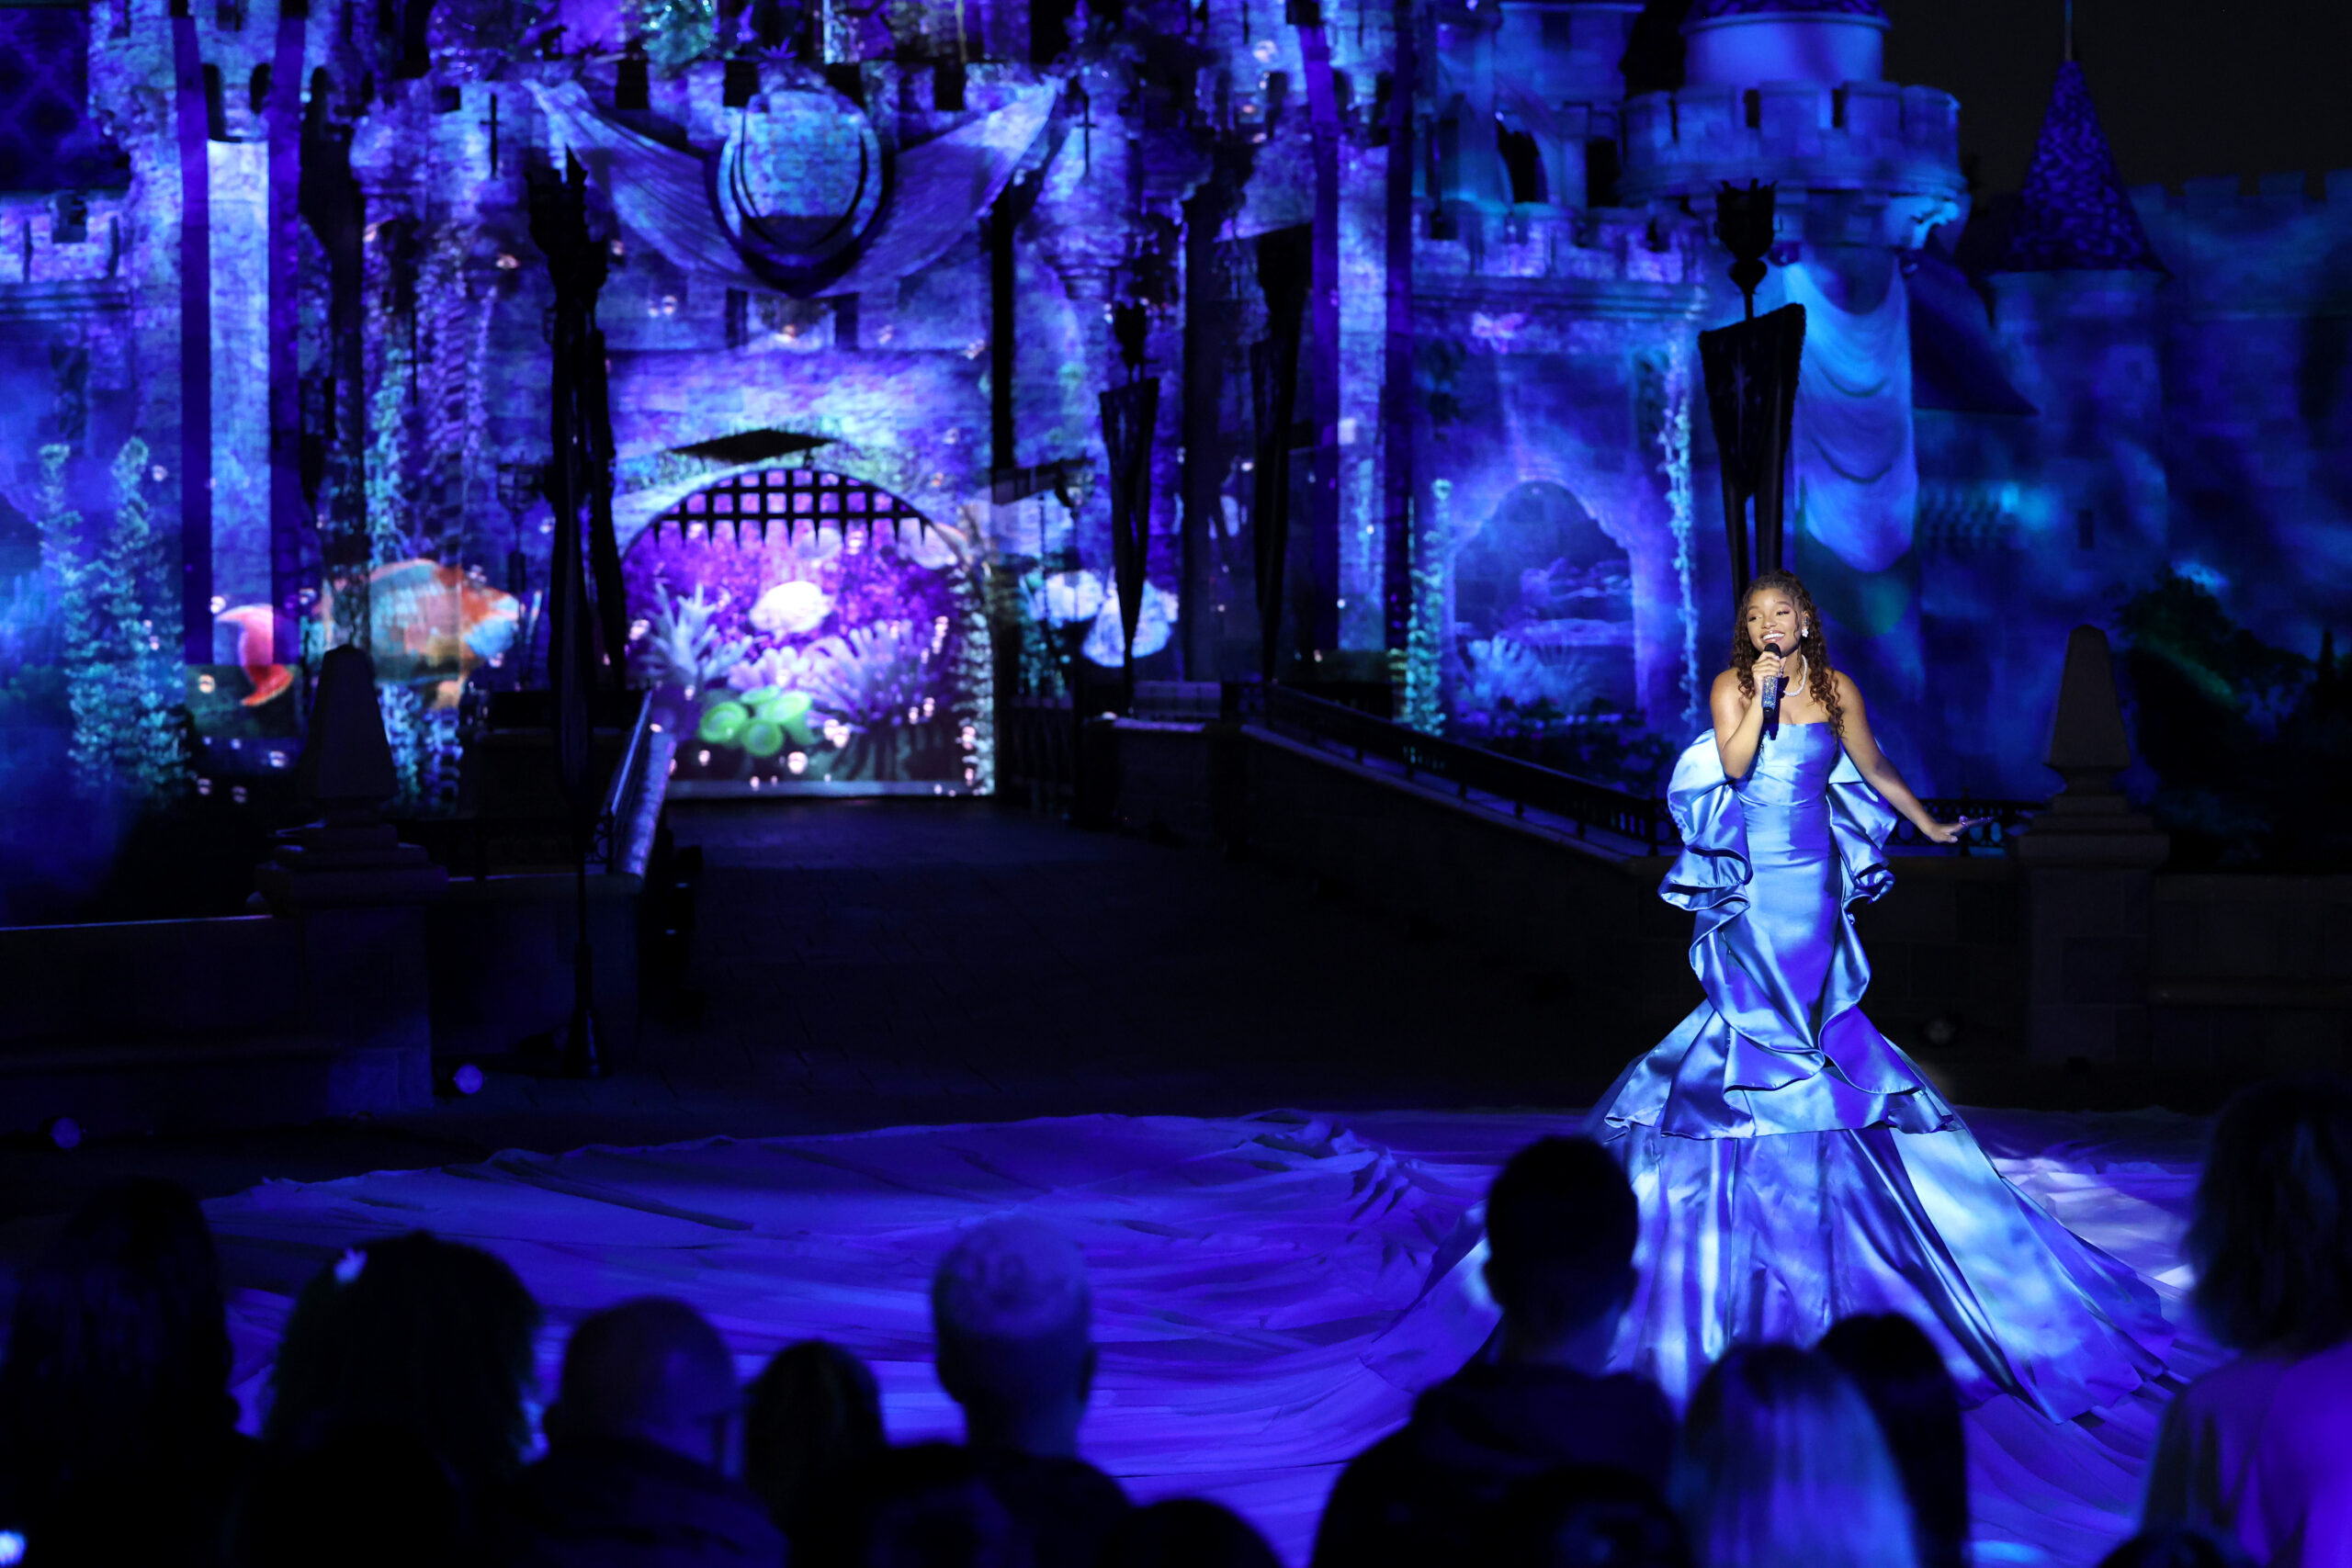 The Little Mermaid’s Halle Bailey Performs “Part Of Your World” At Disneyland